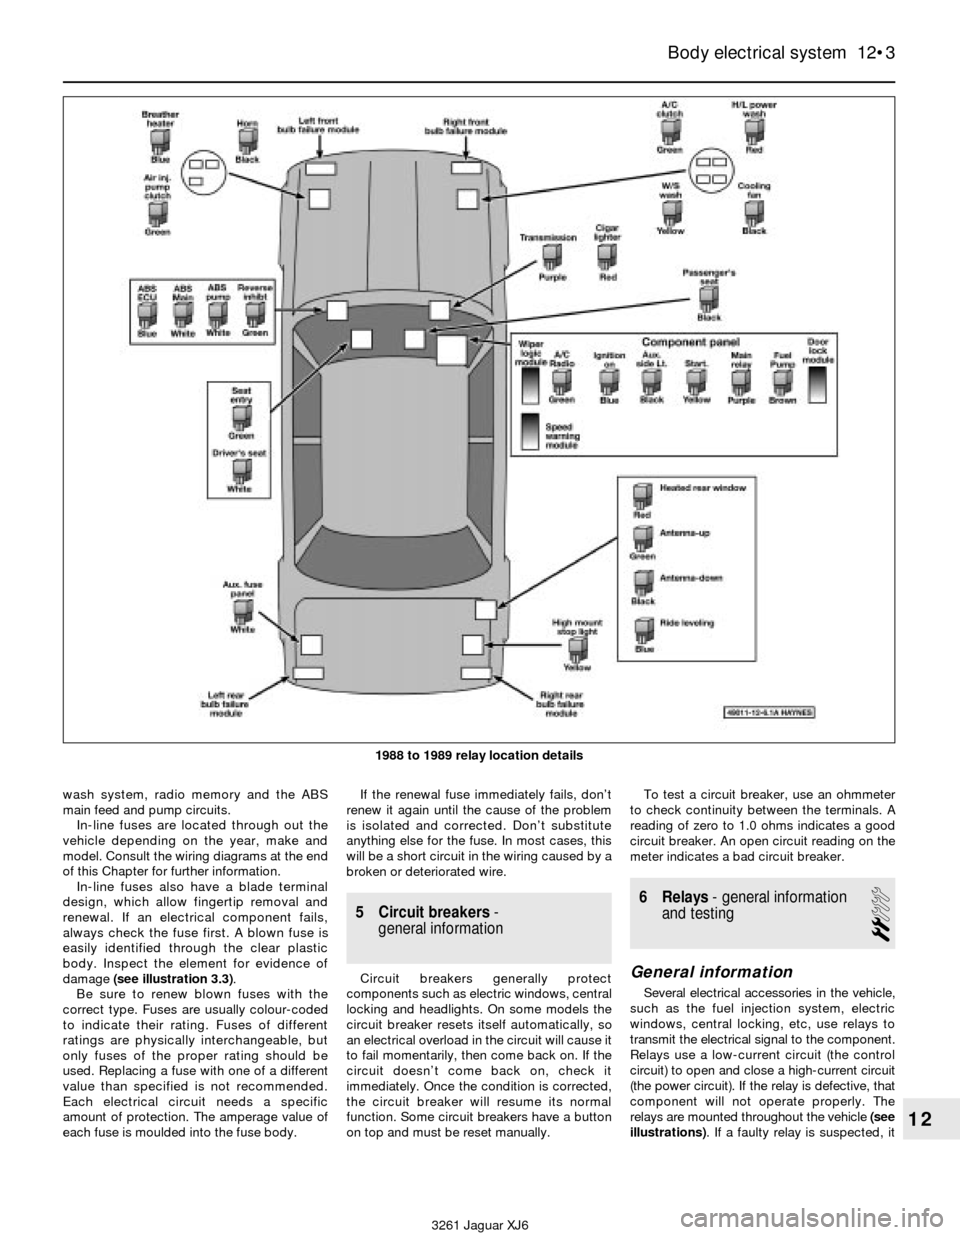 JAGUAR XJ6 1997 2.G Owners Manual wash system, radio memory and the ABS
main feed and pump circuits.
In-line fuses are located through out the
vehicle depending on the year, make and
model. Consult the wiring diagrams at the end
of th